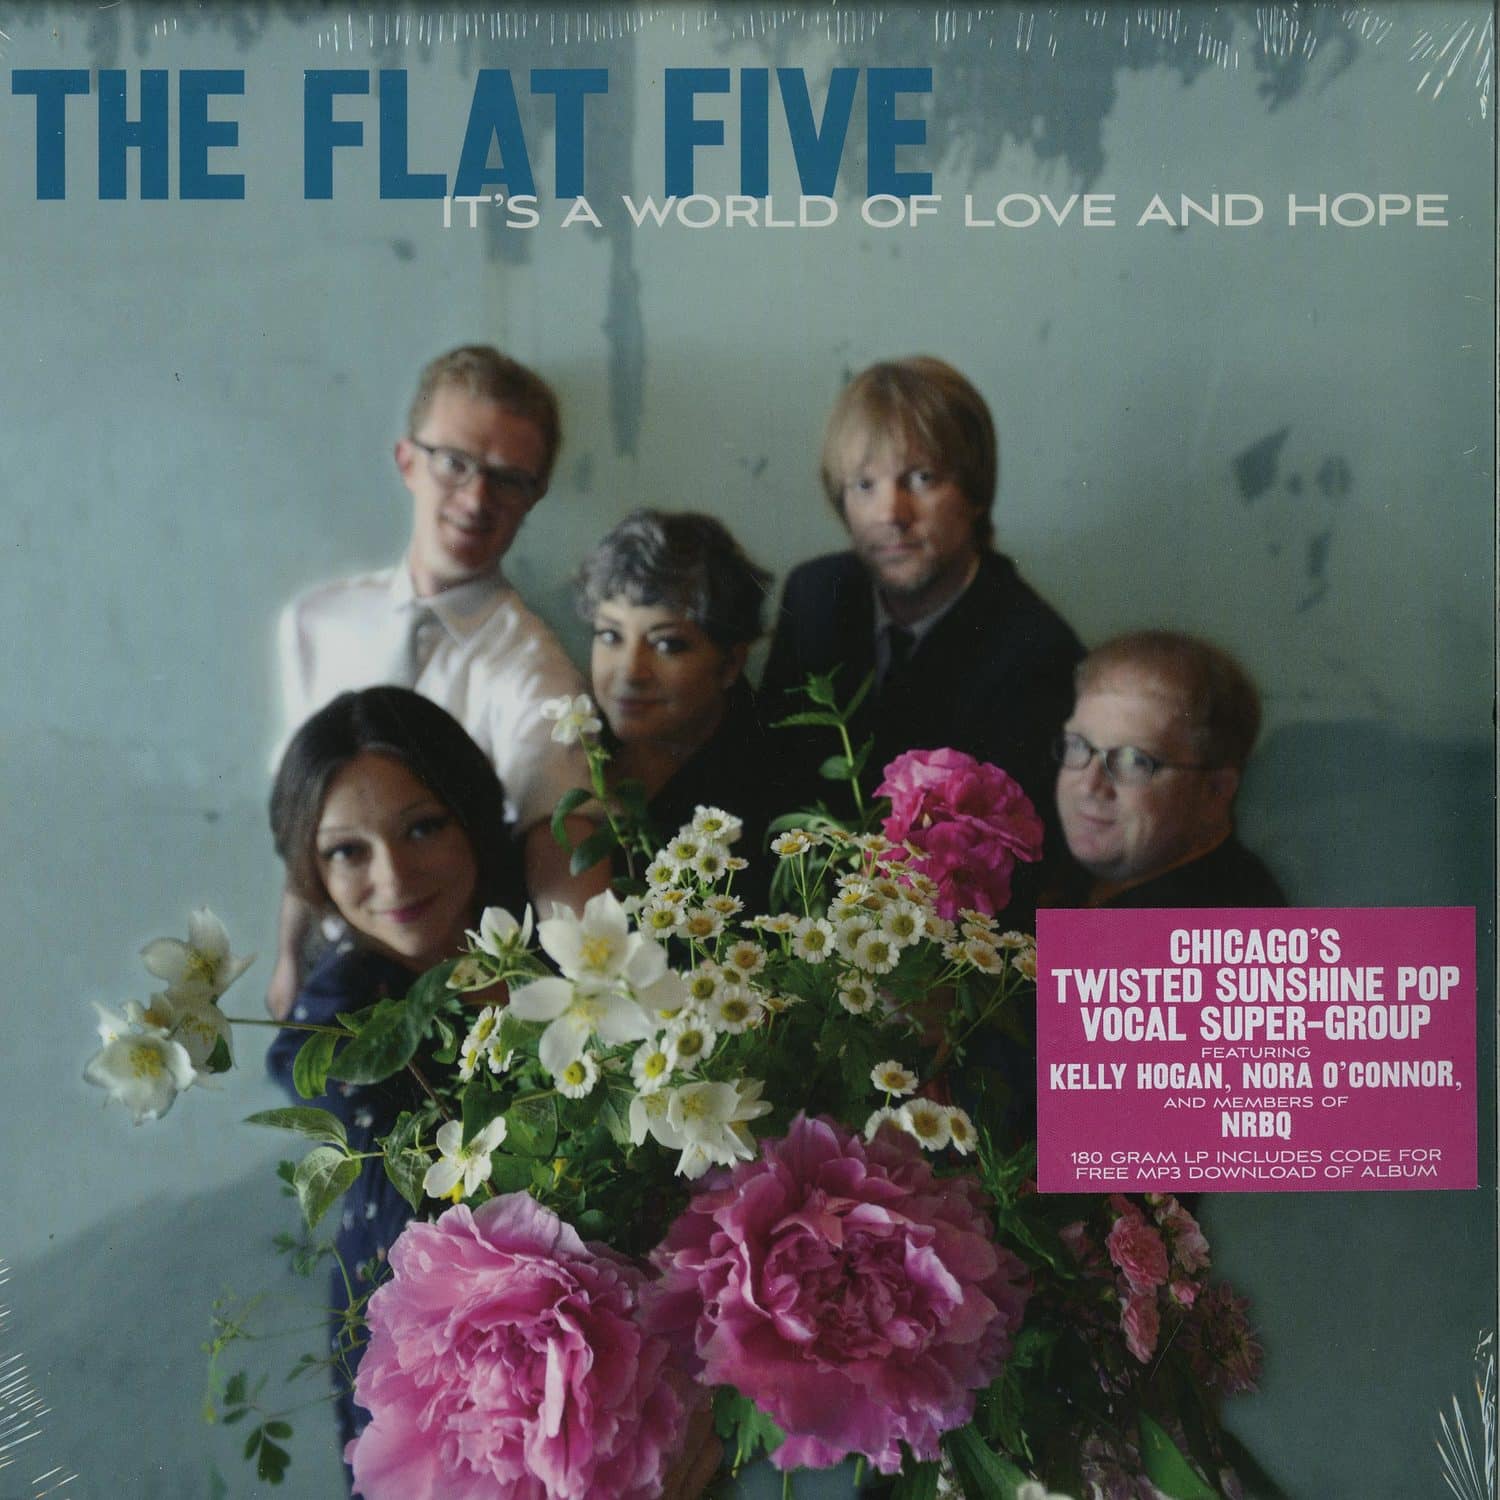 The Flat Five - ITS A WORLD OF LOVE AND HOPE 